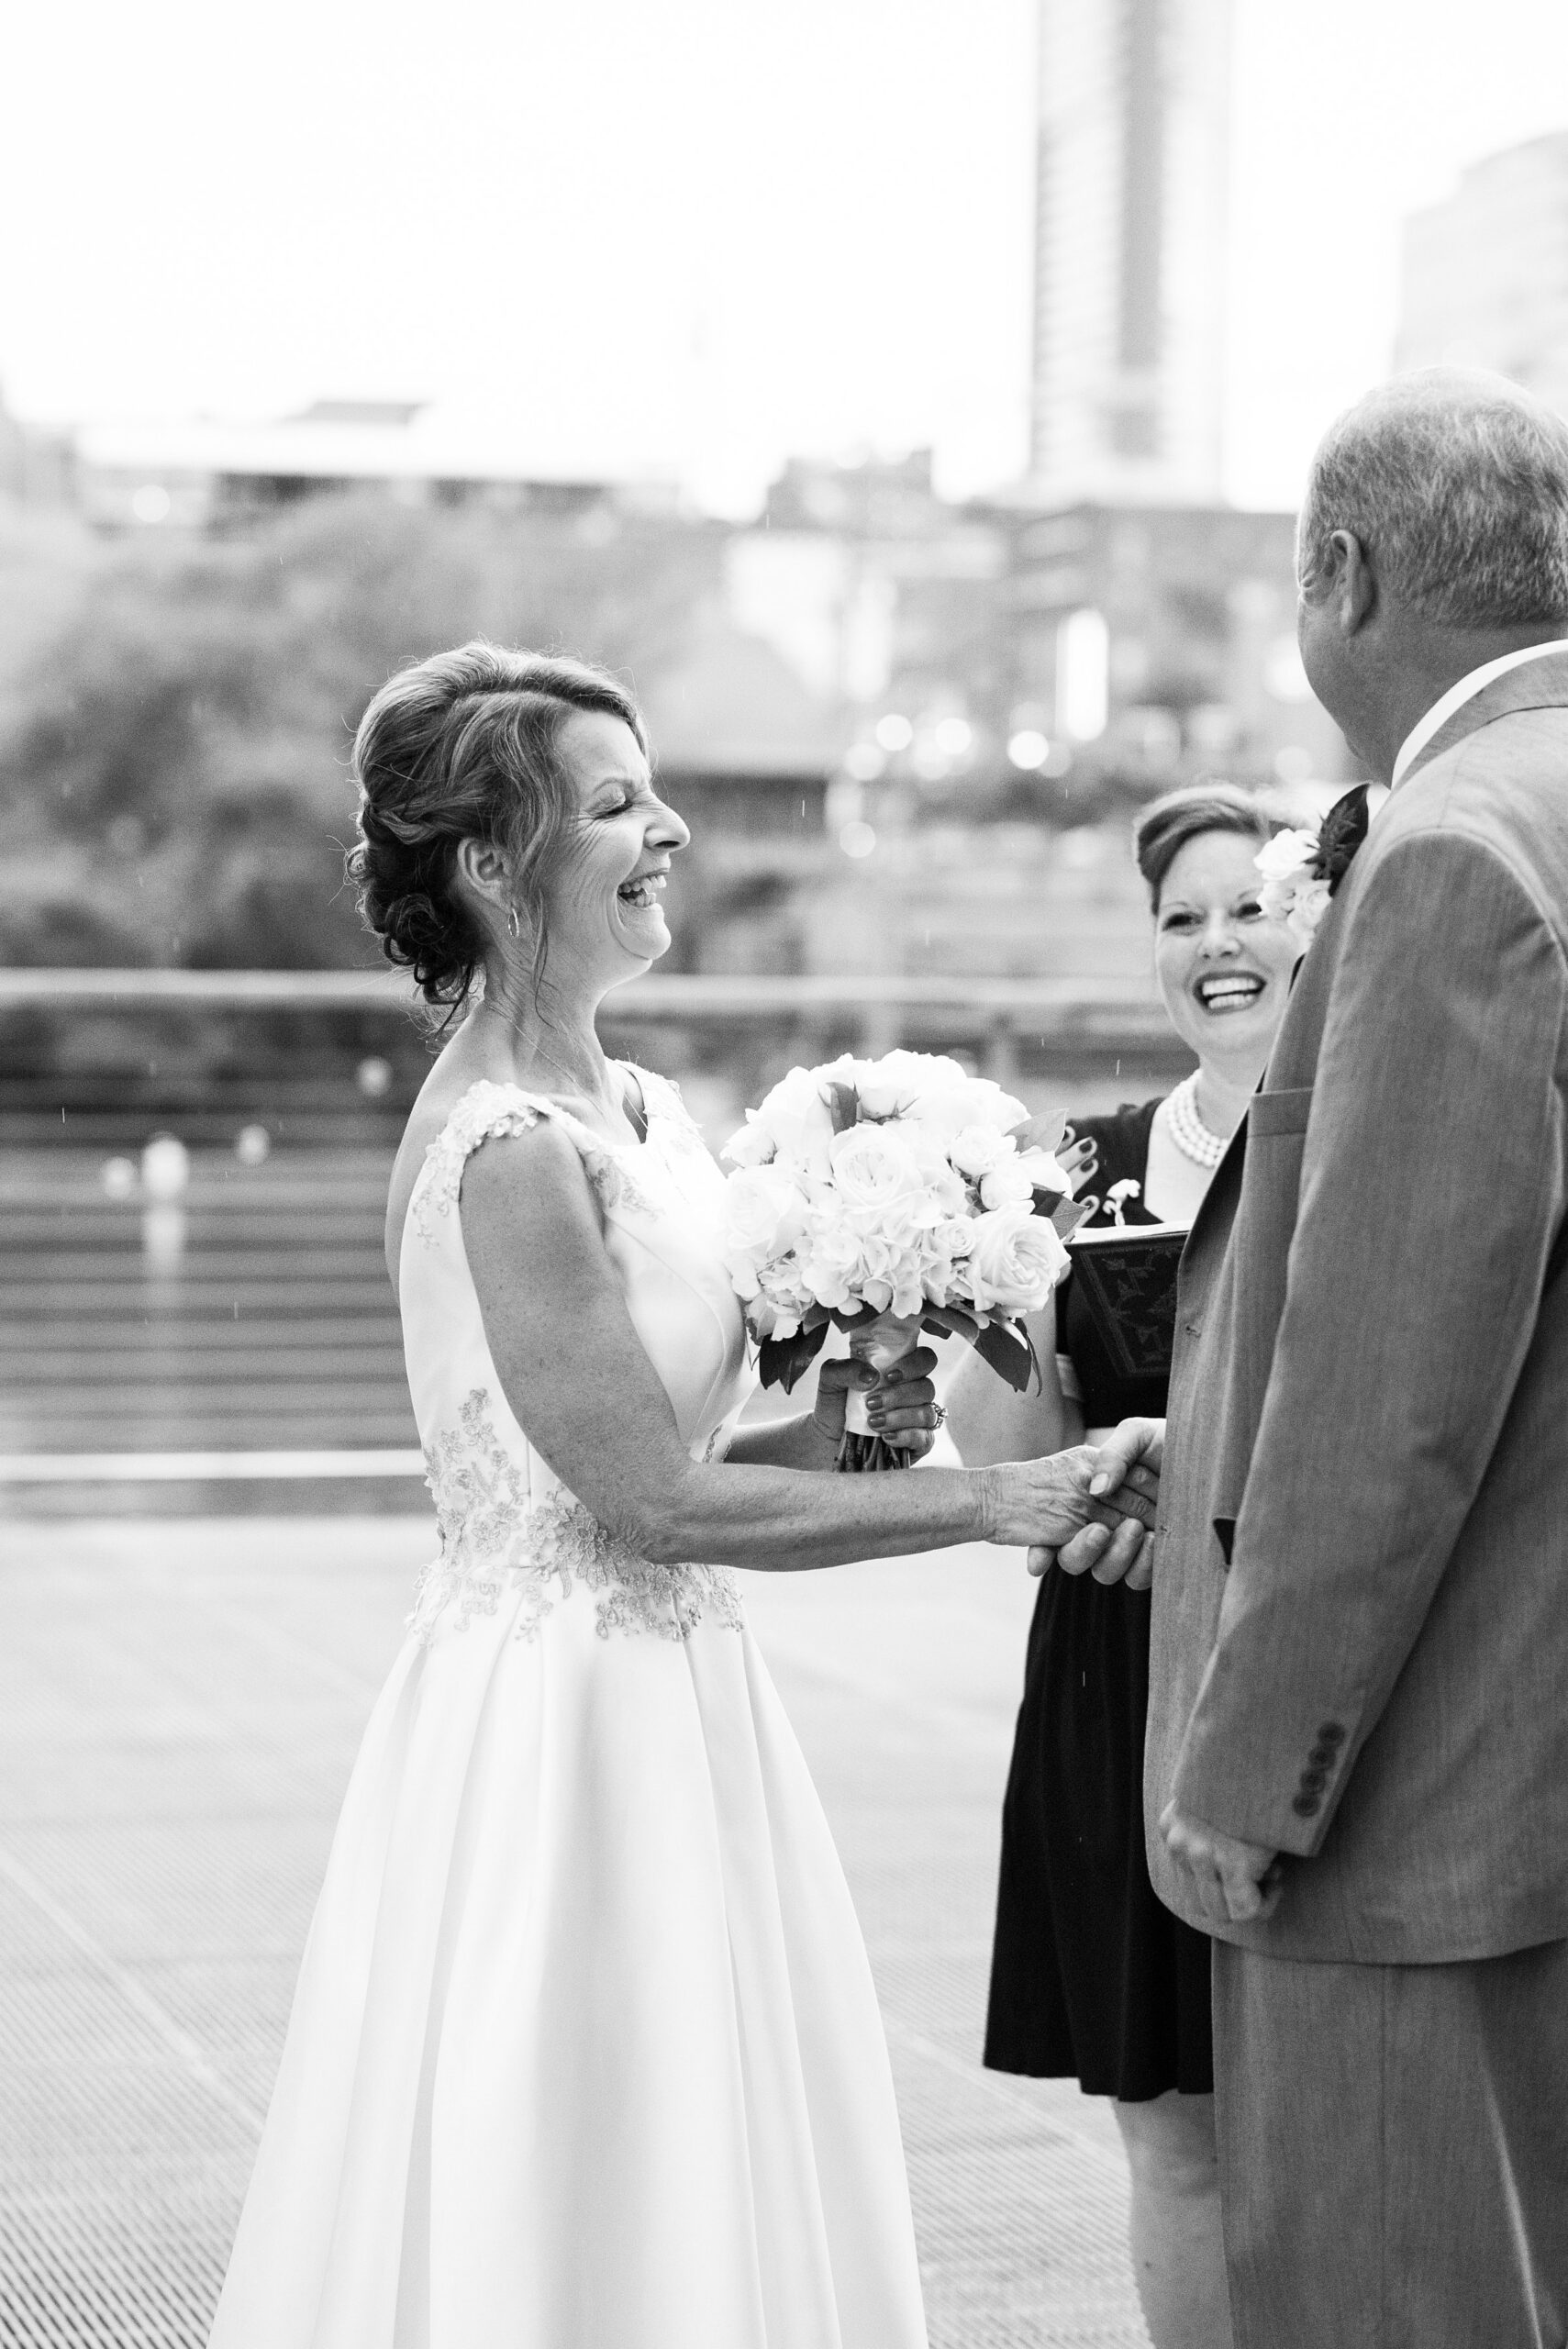 A black and white image of the bride, groom and officiant laughing during the ceremony. The bride and groom hold hands and the bride holds her large bouquet of roses, hydrangeas and magnolia leaves. The bride is wearing a sleeveless wedding dress with a plunging back and lace detailing on the shoulders and around the waist. The groom is wearing a suit with a white shirt and white boutonniere. The officiant is wearing a black dress with three strands of pearls. 